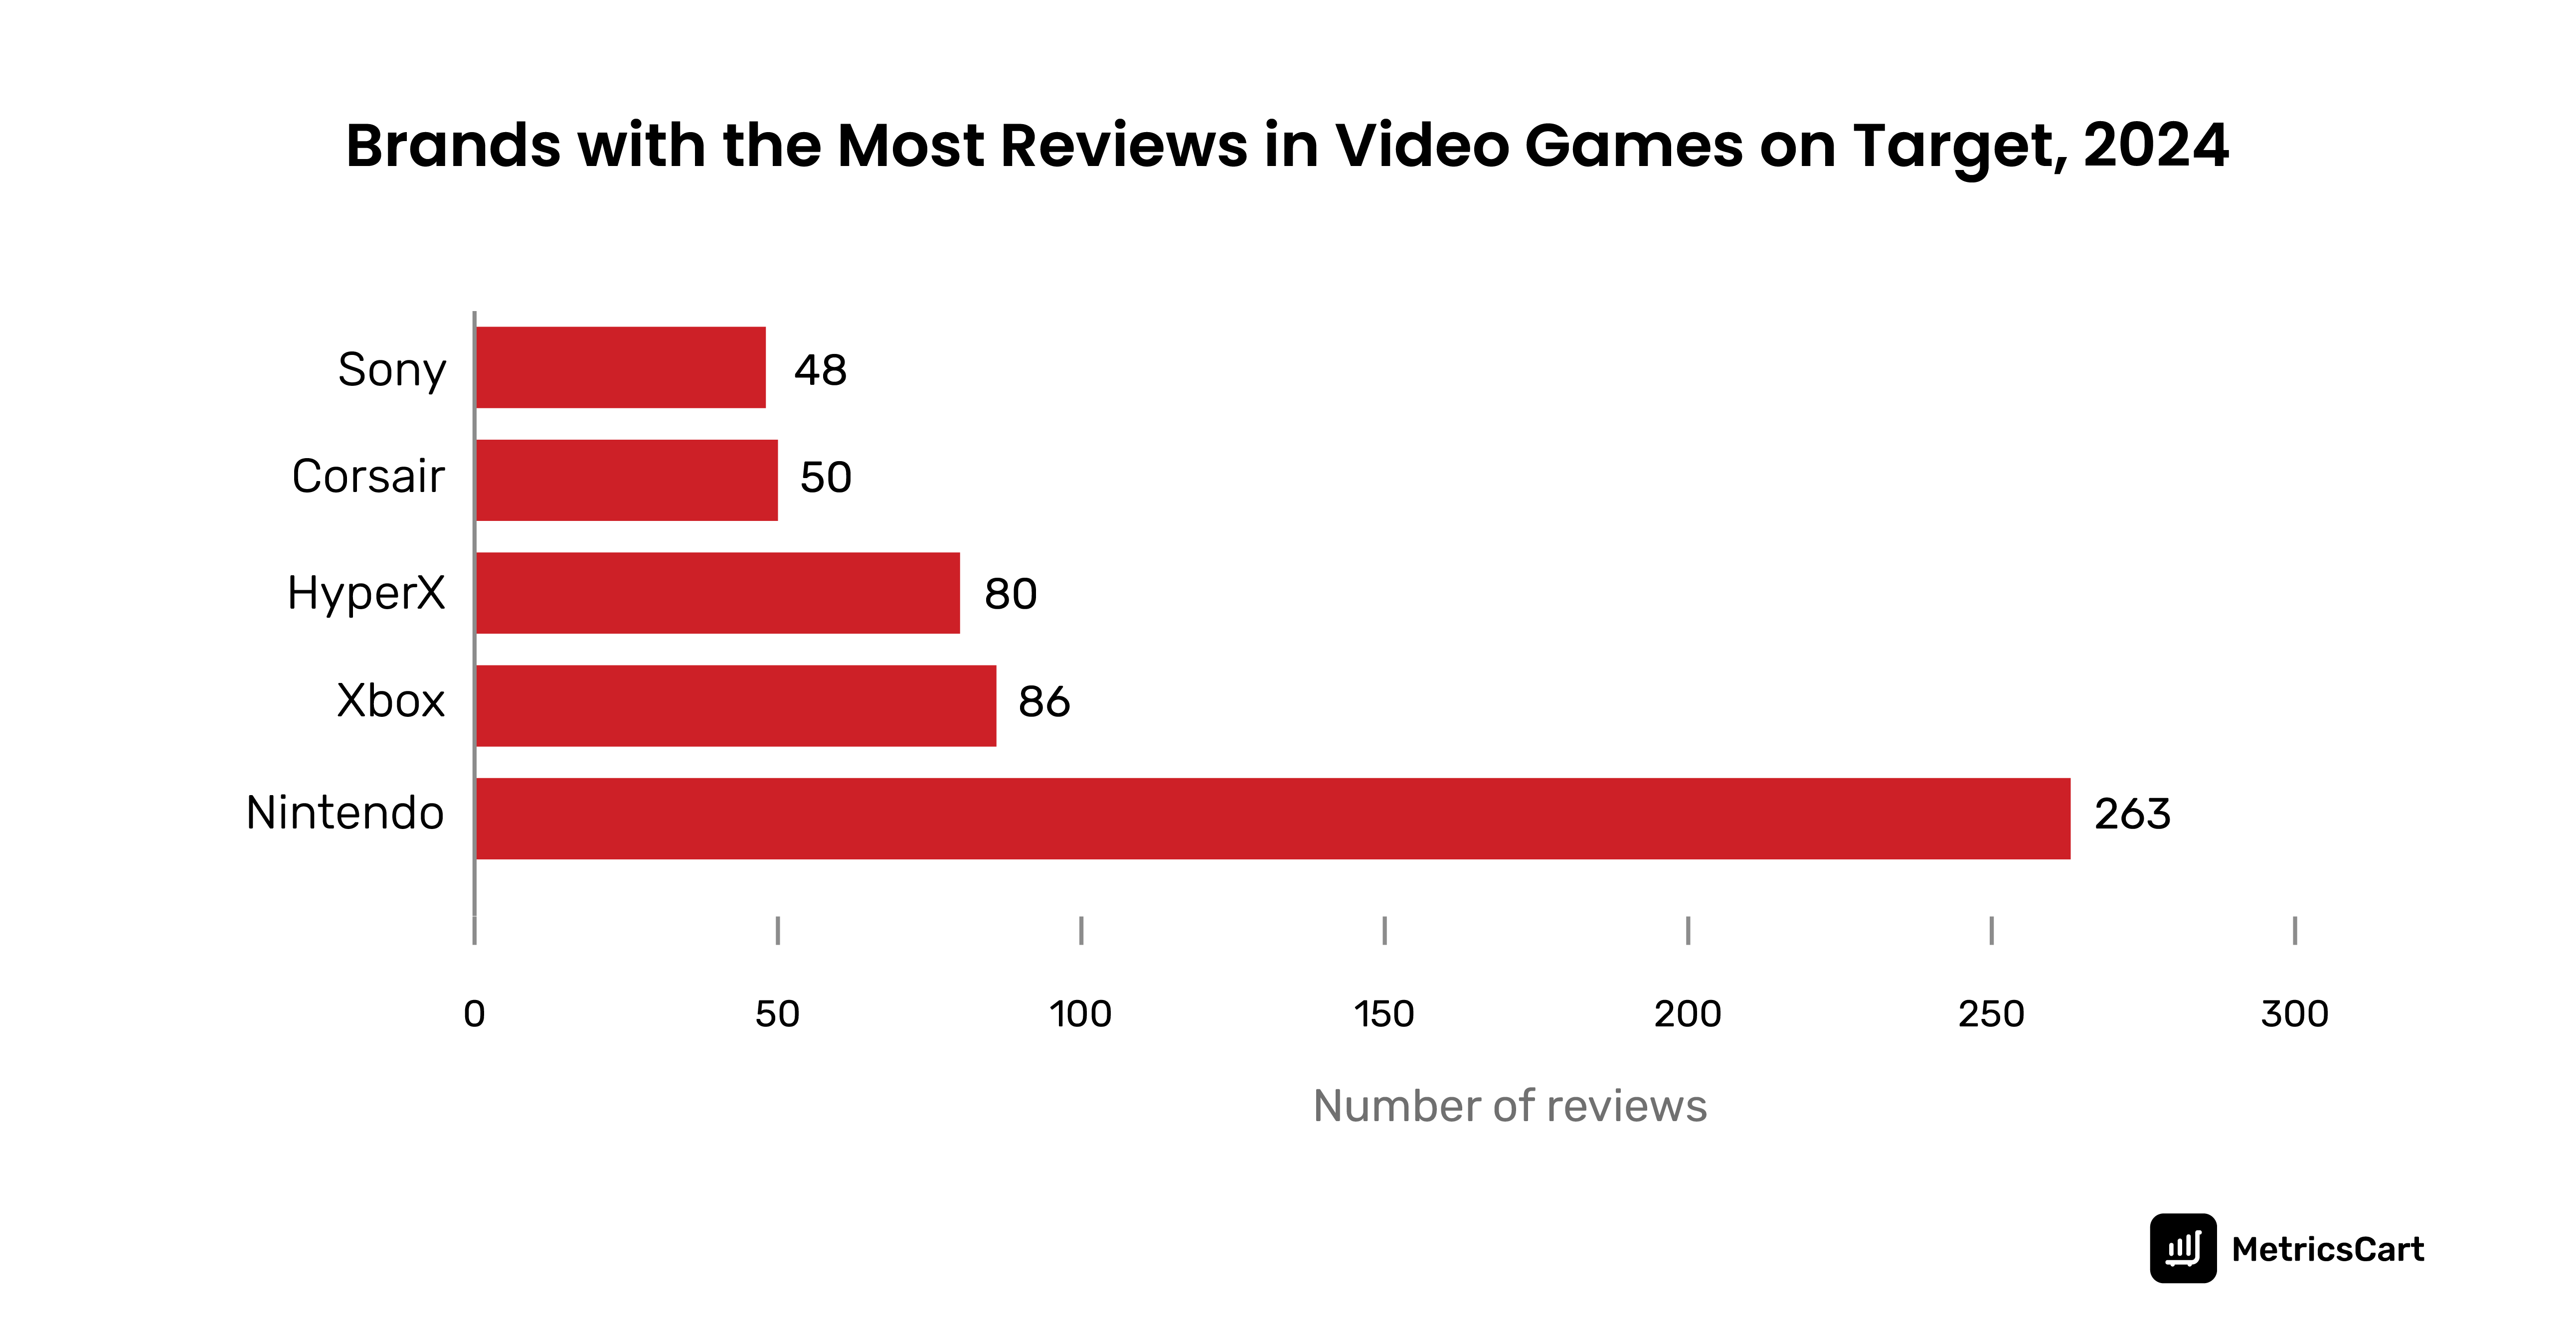 The graph shows brands with most reviews in video games in Target, 2024